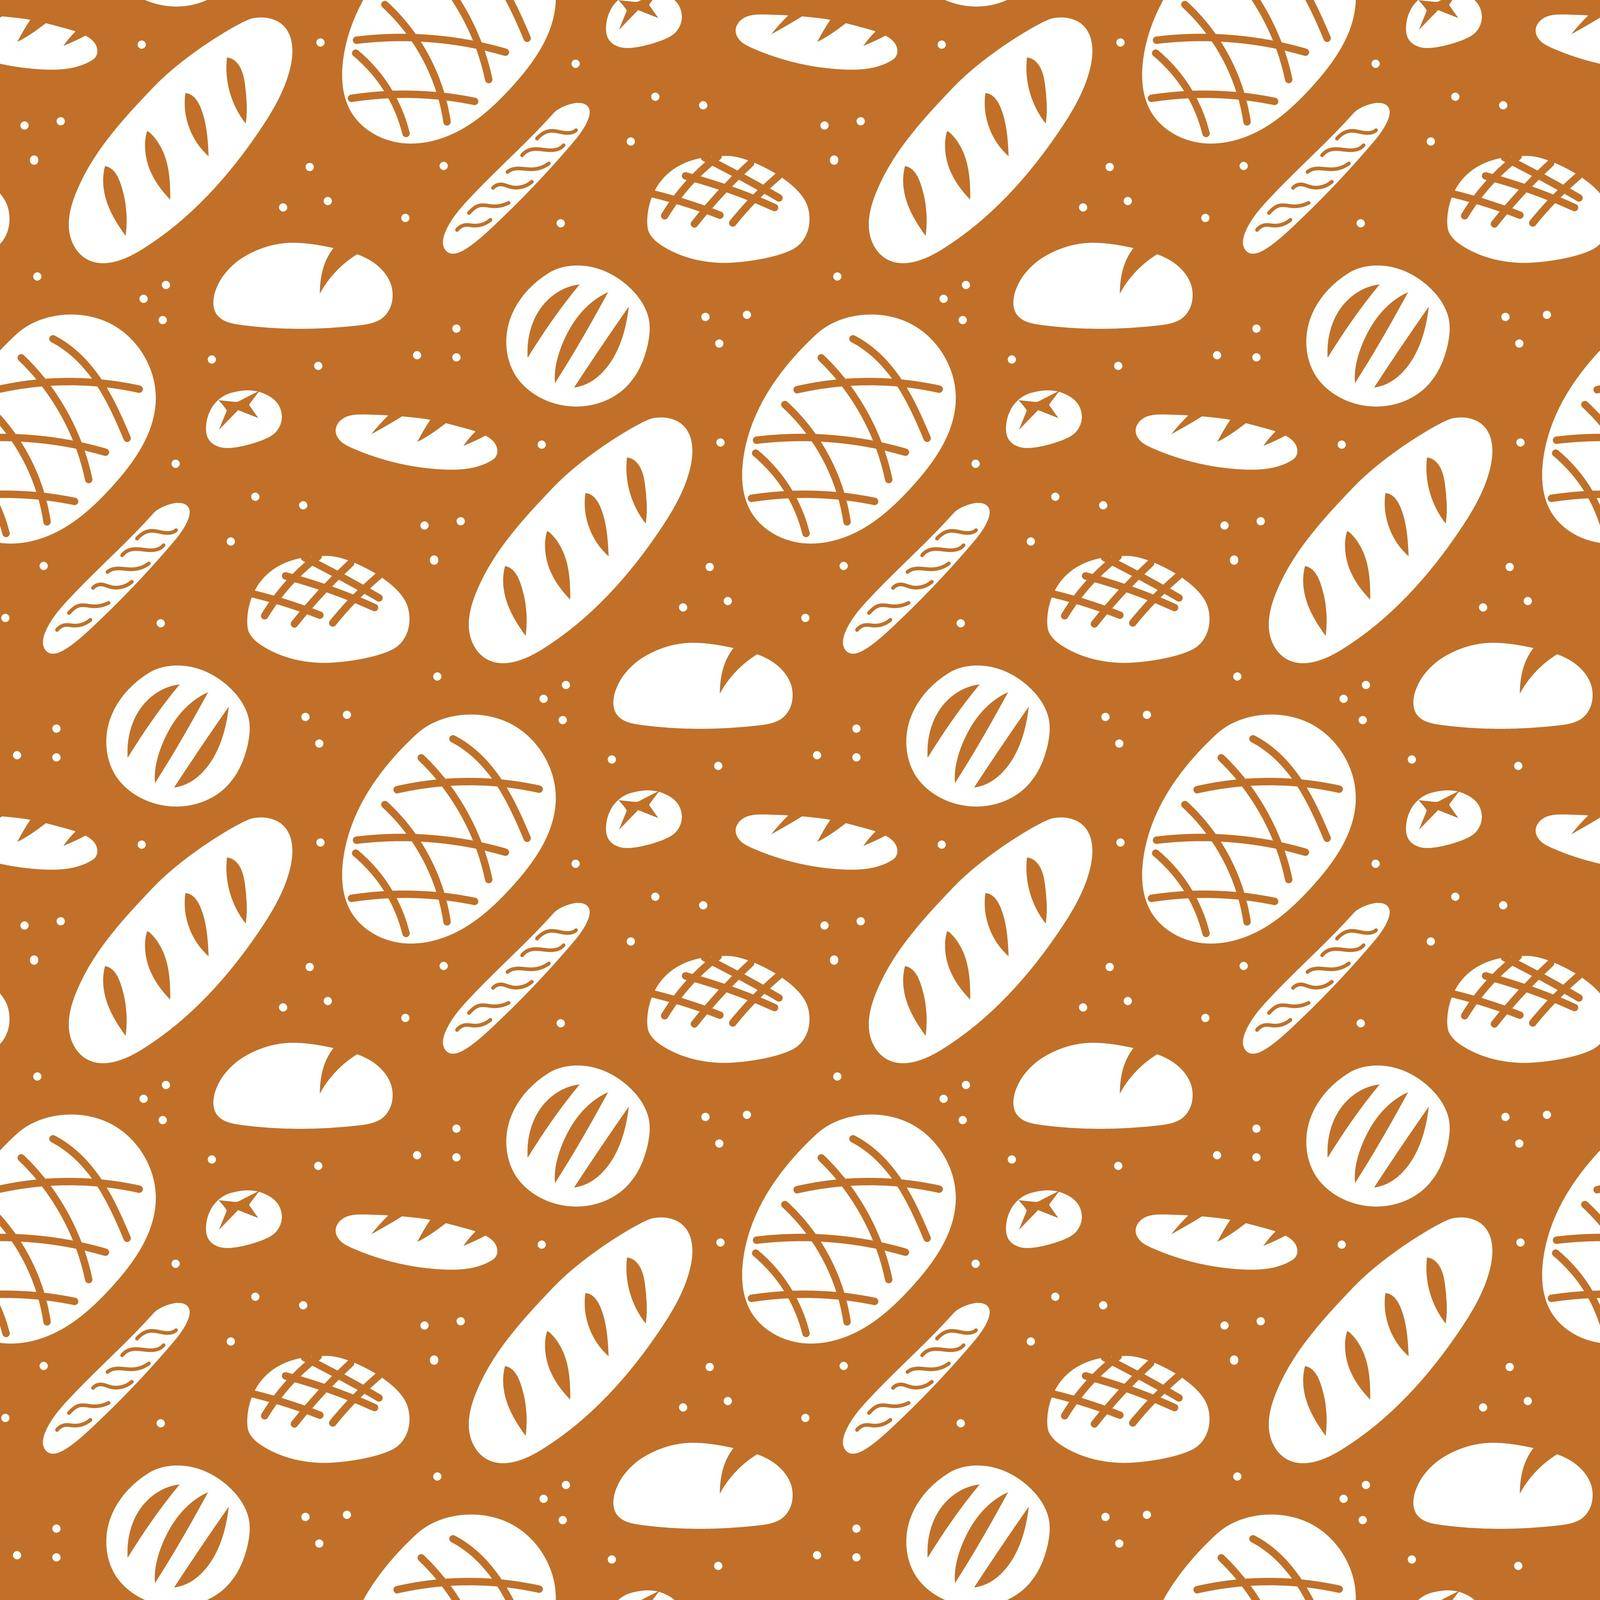 Bread pattern. Simple single color design for packaging, wrapping paper, bags, menu, branding for bakery or coffee shop.